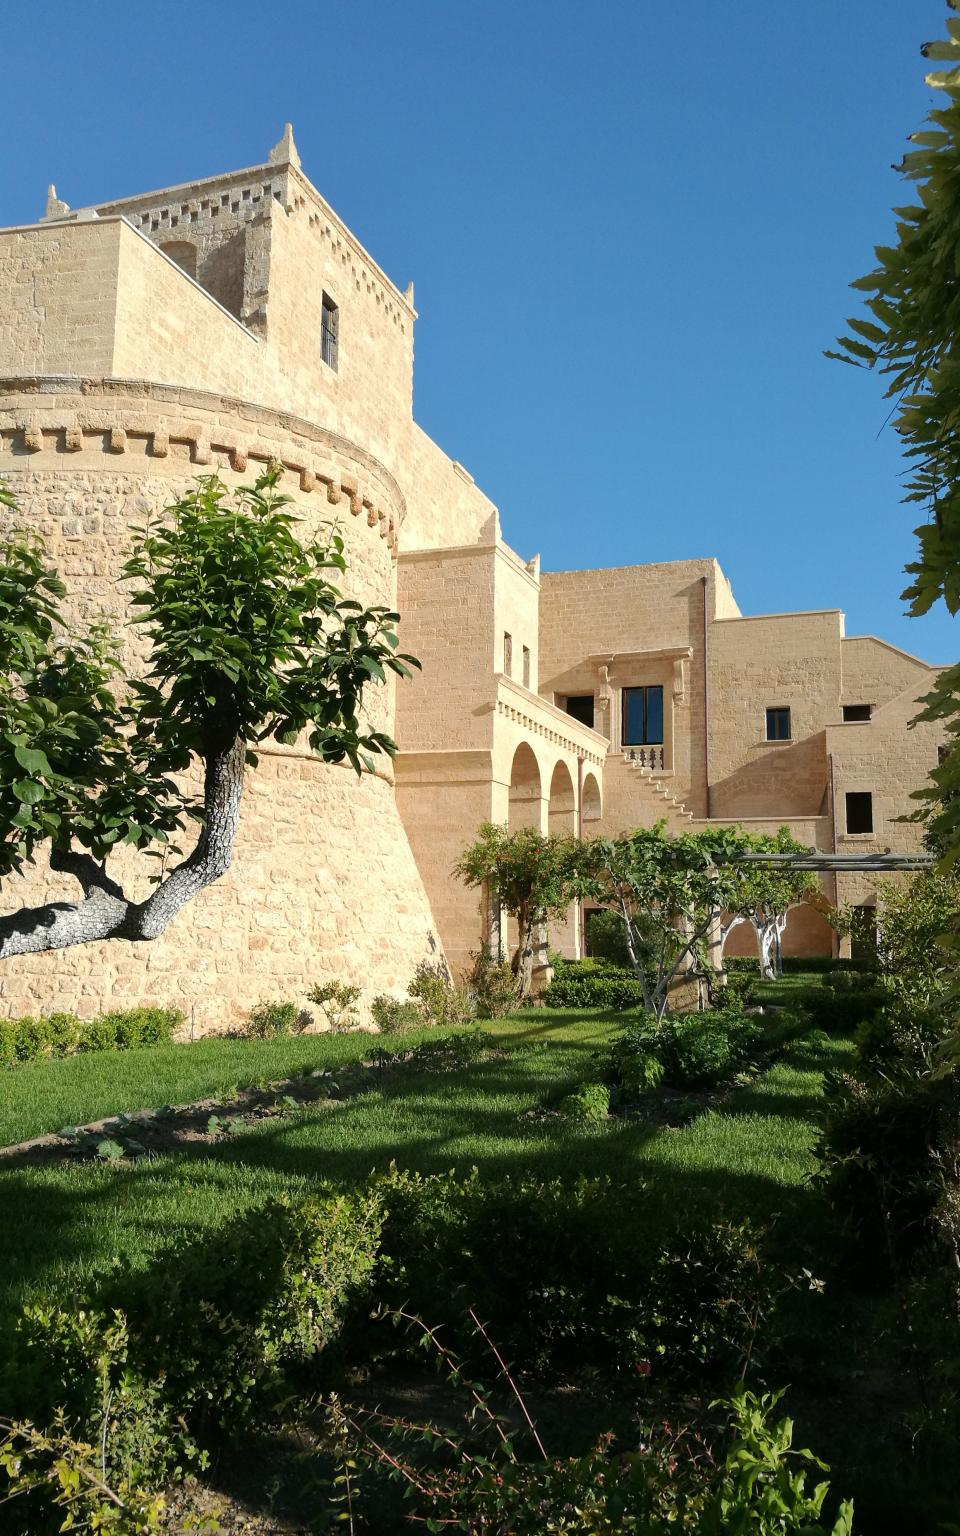 Castello di Ugento in southern Puglia, the historic monument that has been renovated to create a luxury hotel and the Puglia Culinary Centre